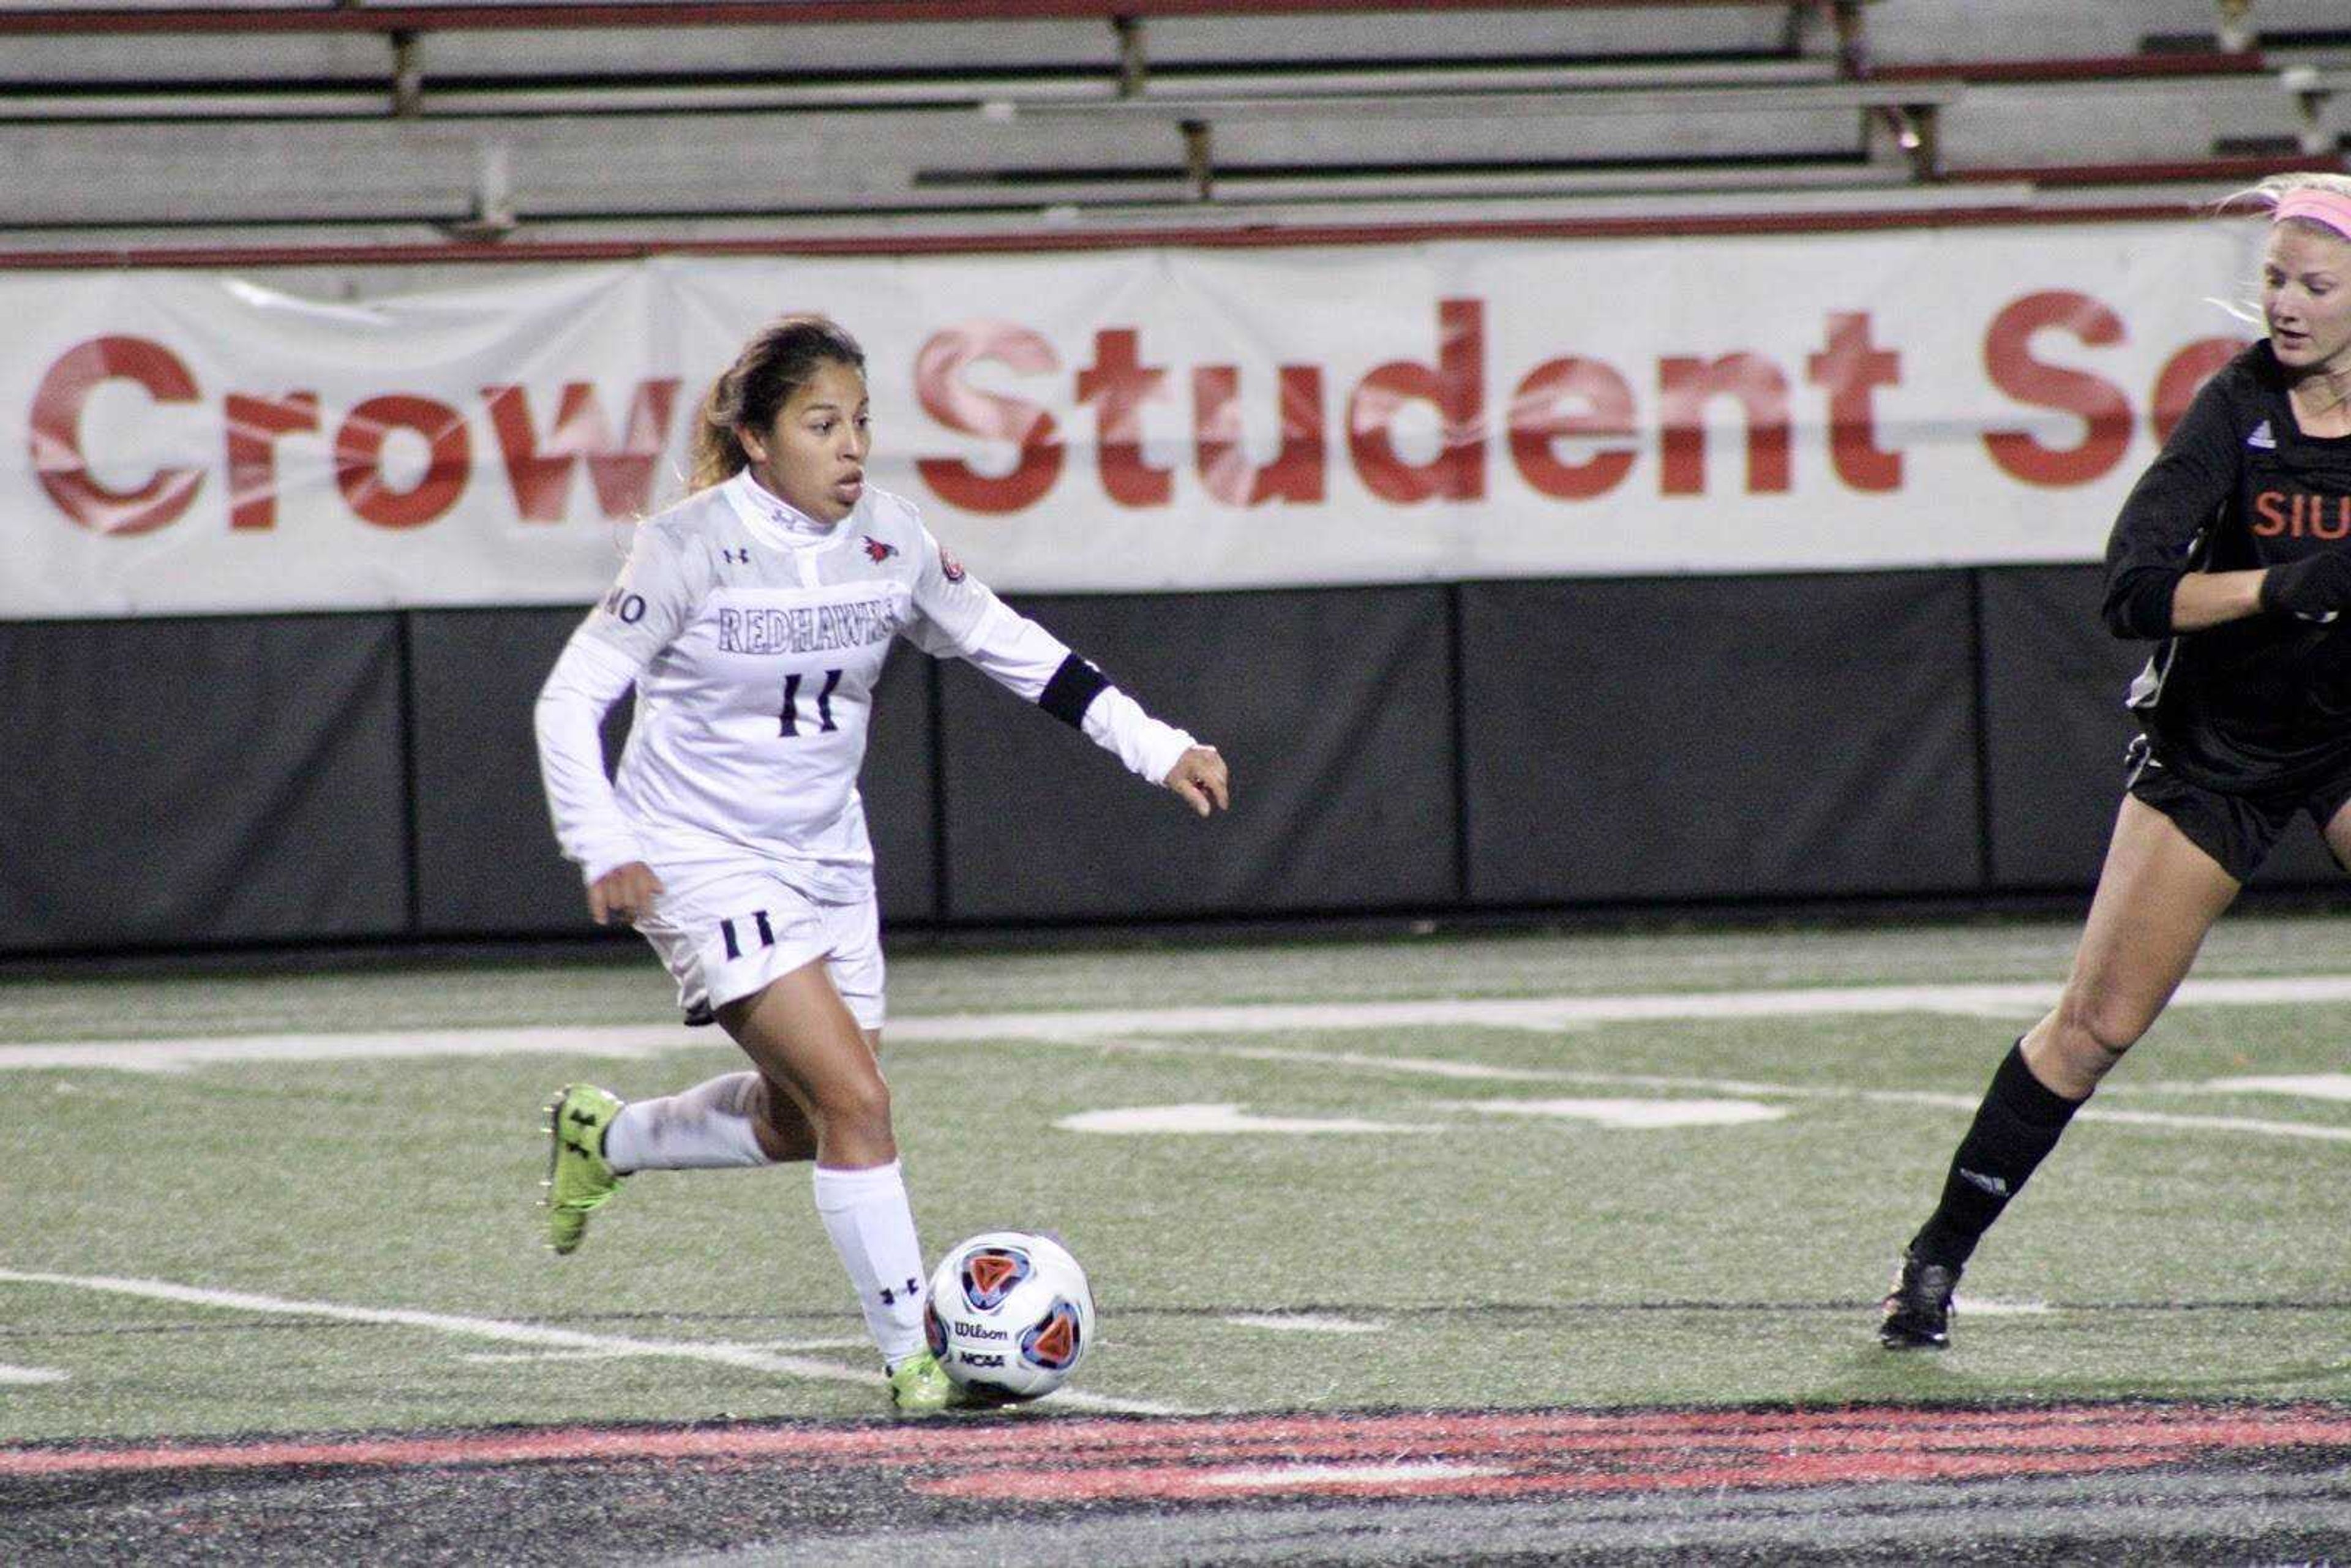 Senior midfielder Esmie Gonzales carries the ball near the middle of the field against SIUE on Nov. 8 at Houck Field.